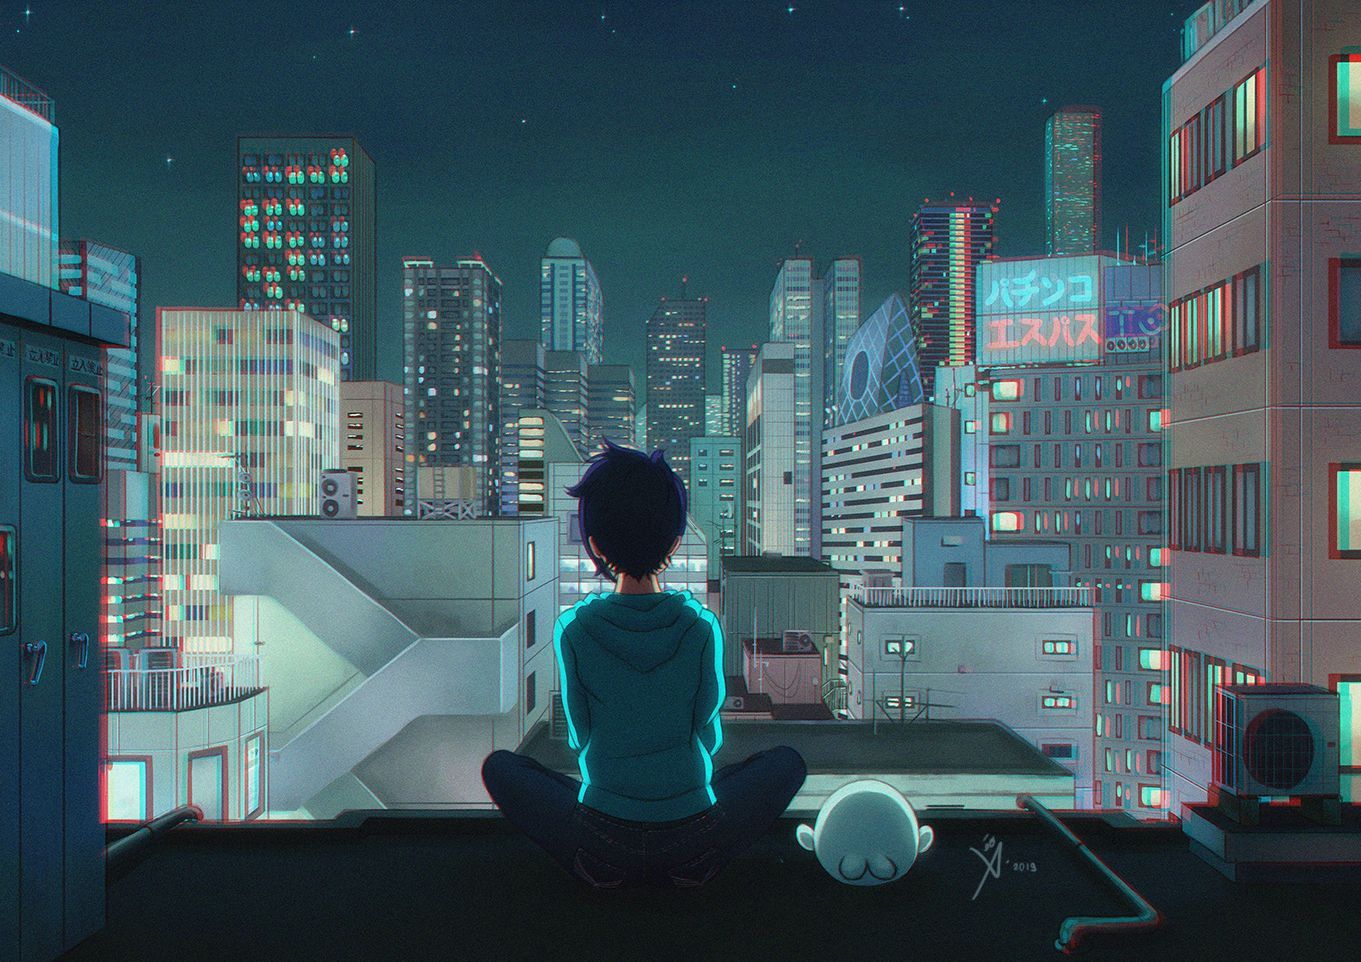 Léo Quéval is creating Artworks & Animations. Patreon. Night illustration, Anime city, Anime city aesthetic